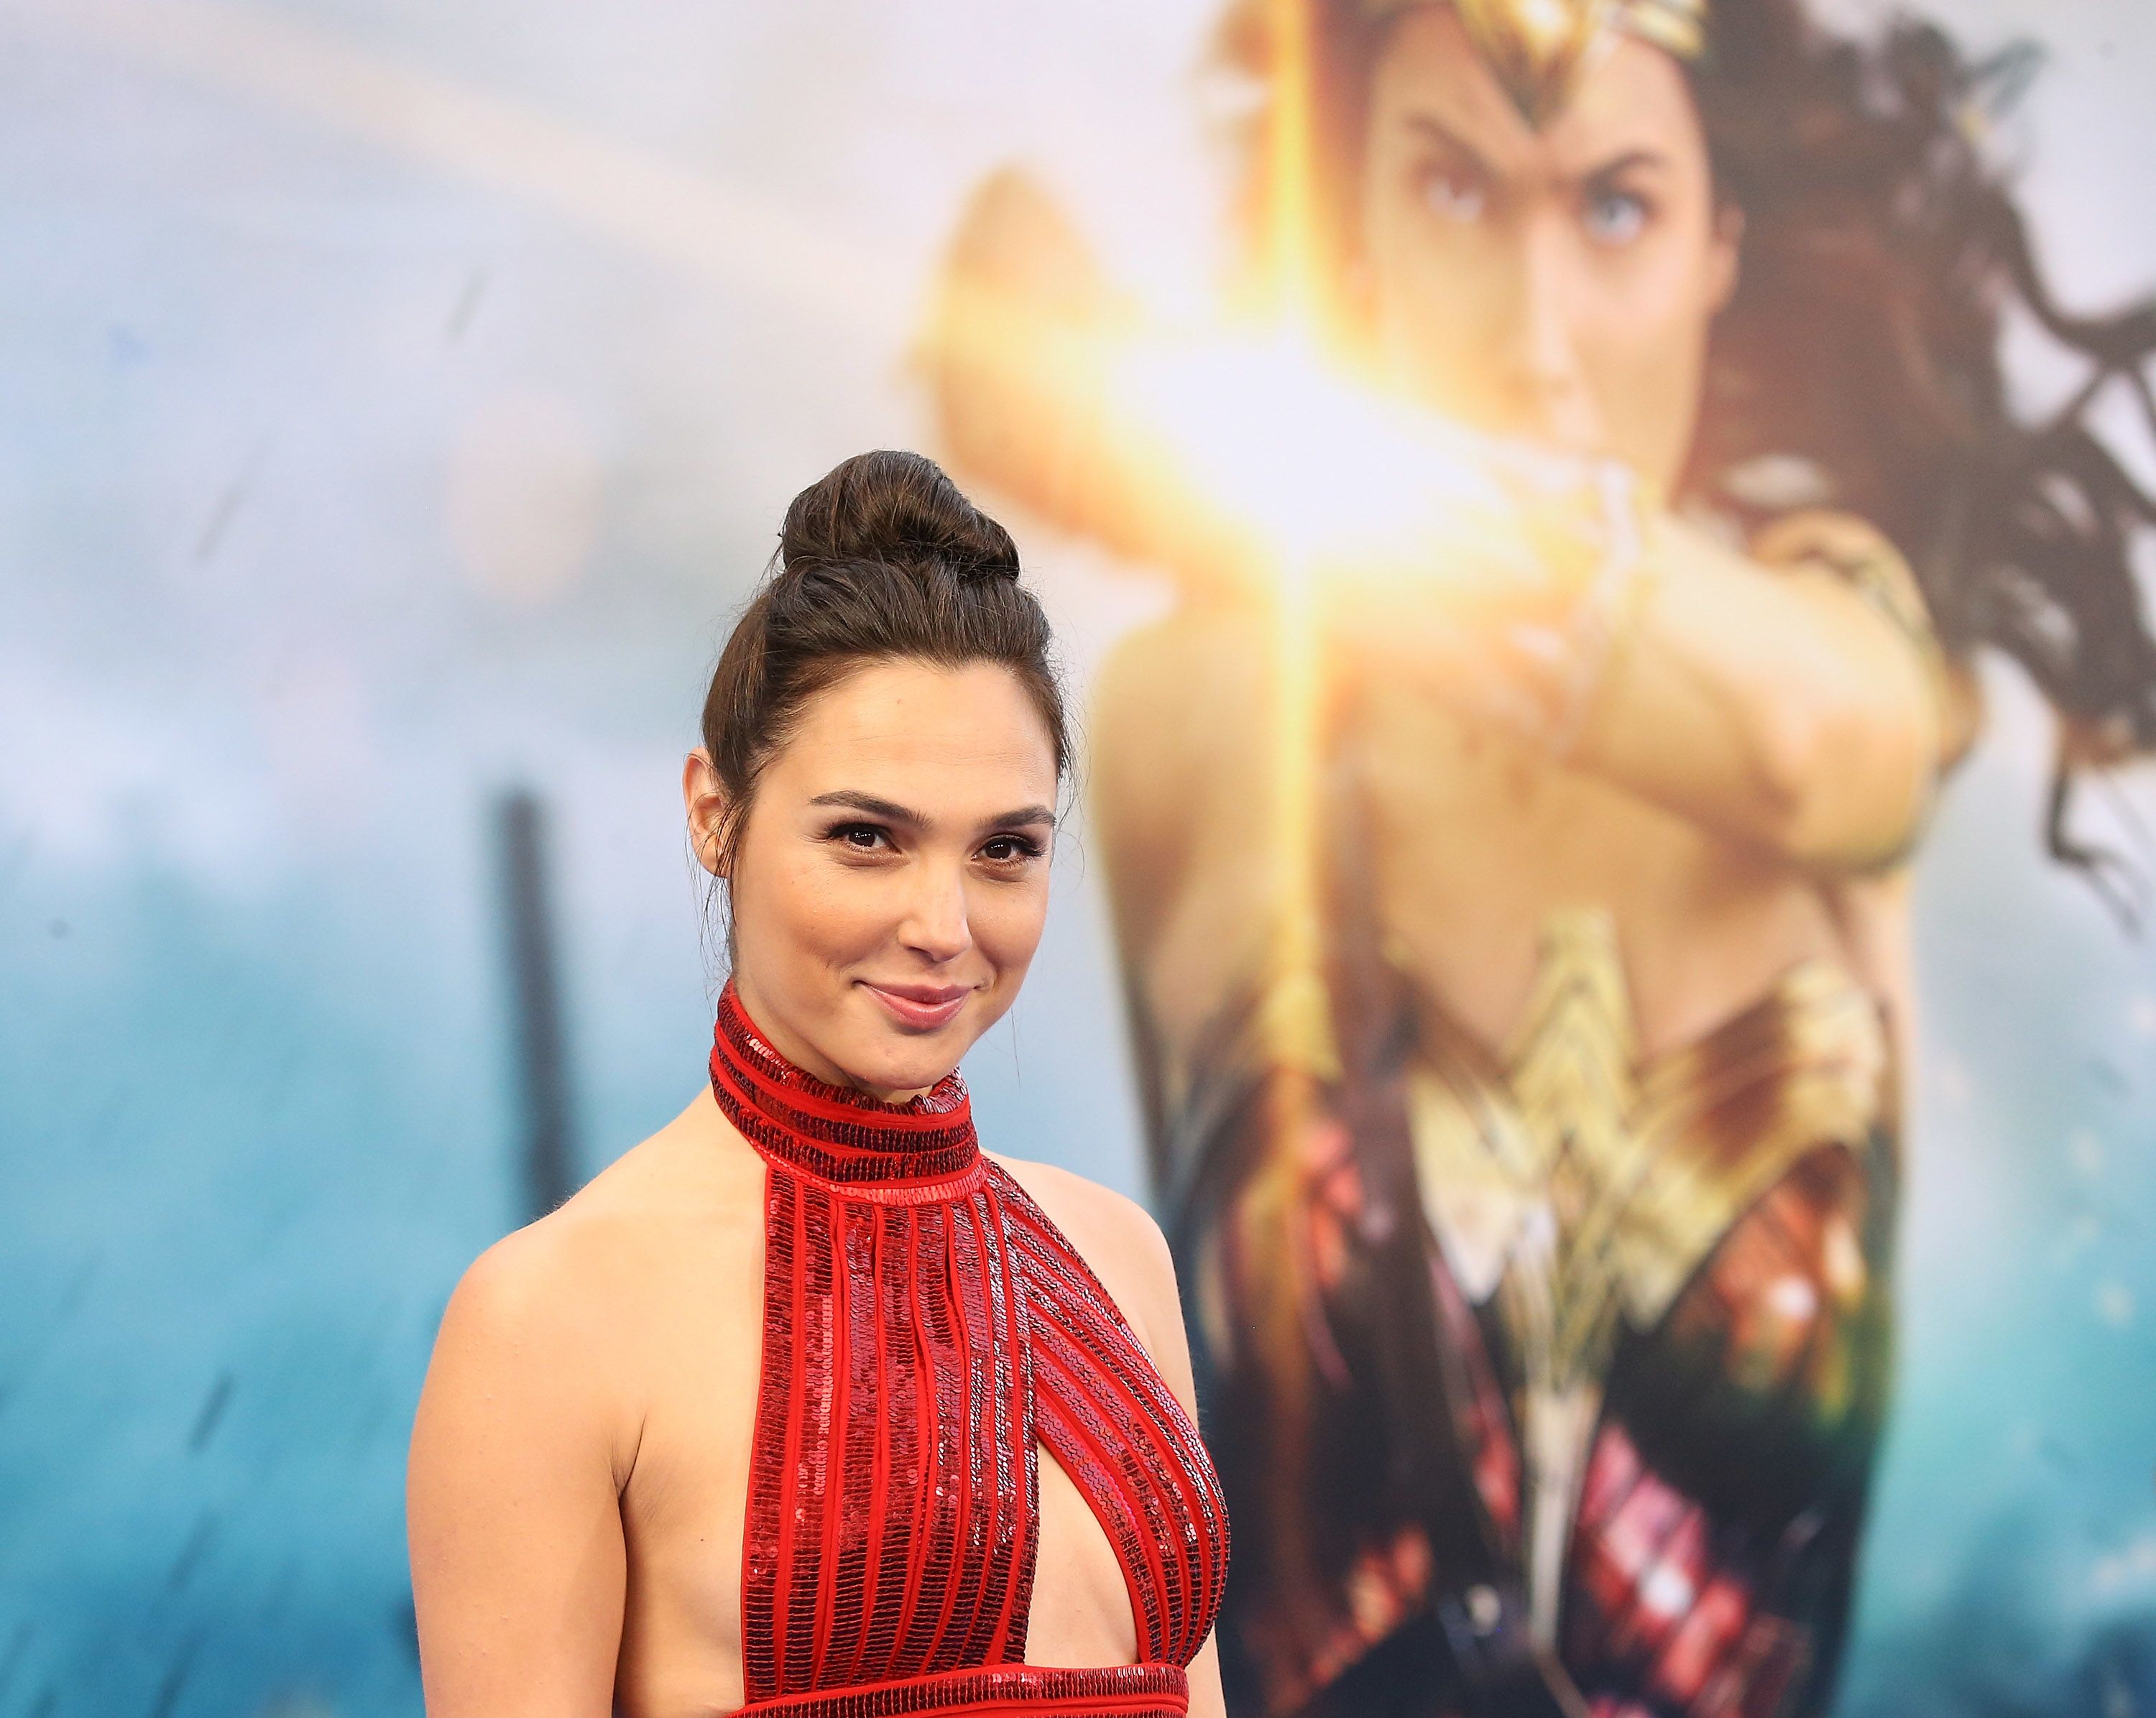 Gal Gadot says Wonder Woman 3 is happening and she's returning